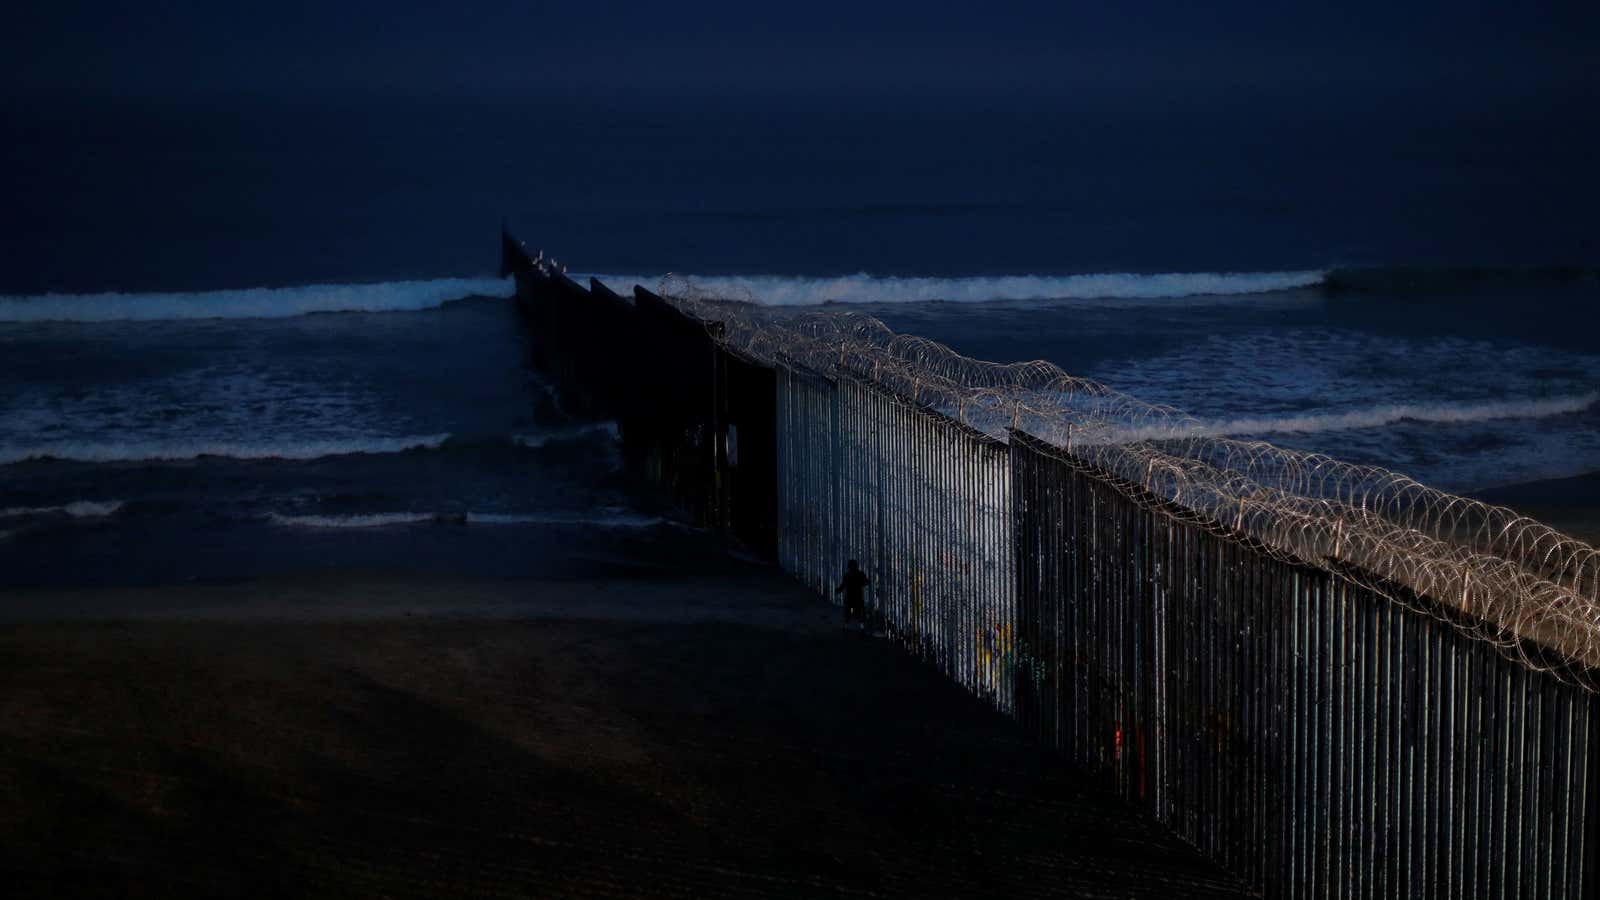 The fence at California’s Imperial Beach.